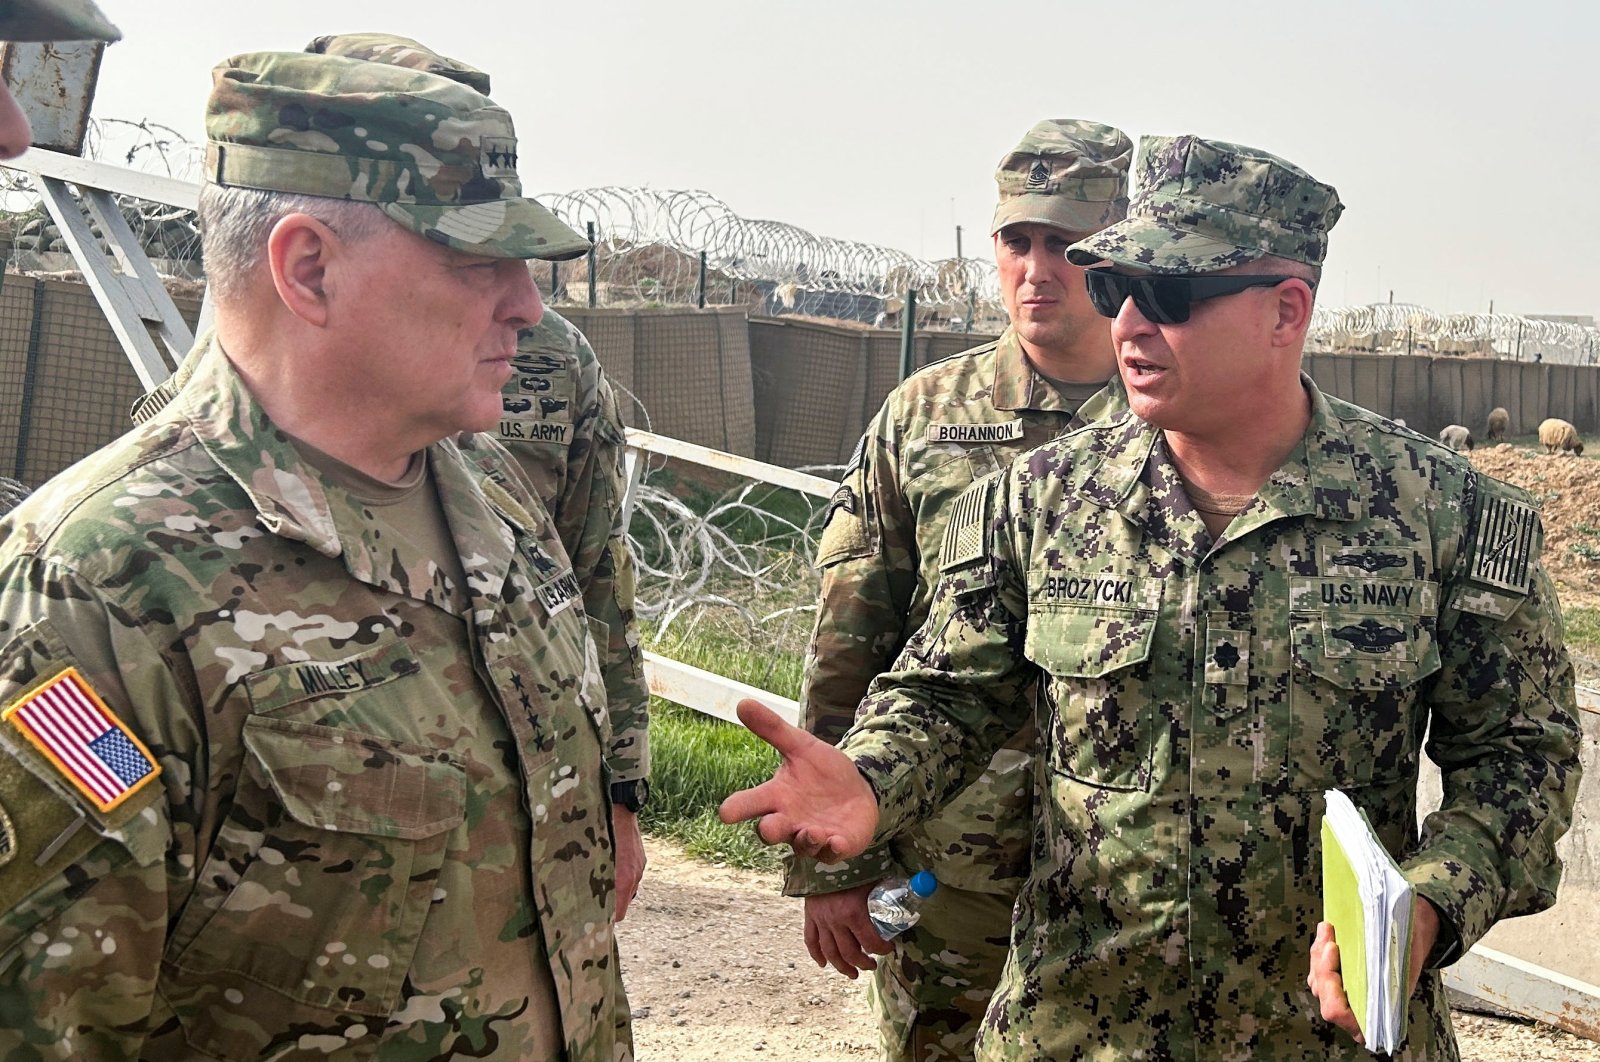 U.S. Joint Chiefs Chair Army General Mark Milley speaks with U.S. forces in Syria during an unannounced visit, at a U.S. military base in northeast Syria, March 4, 2023. (Reuters Photo)